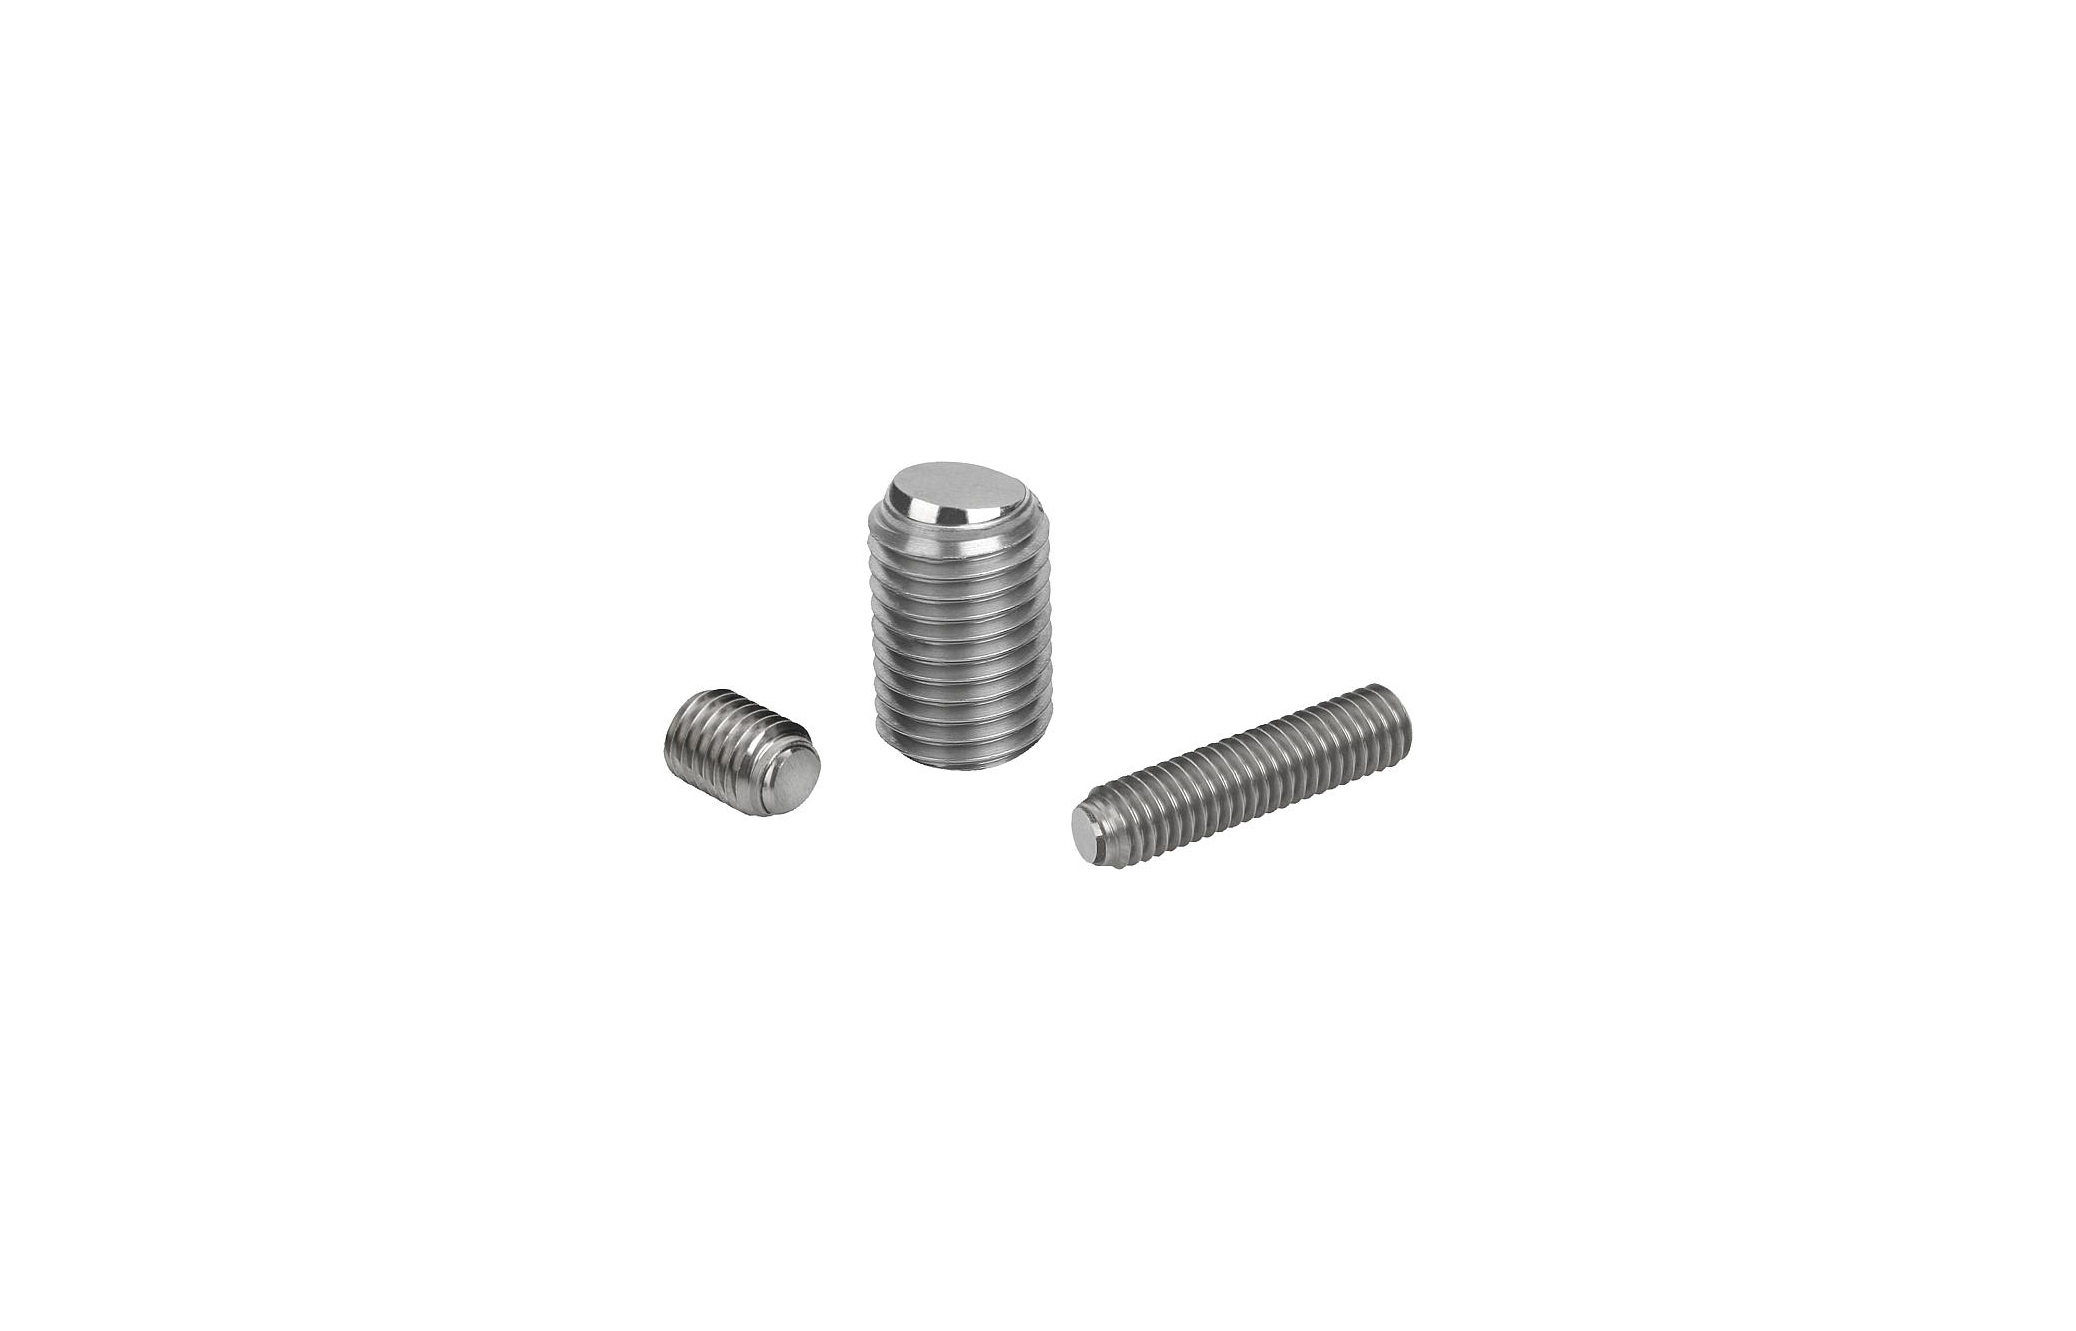 K0384 Ball-end thrust screws without head stainless steel with flattened ball